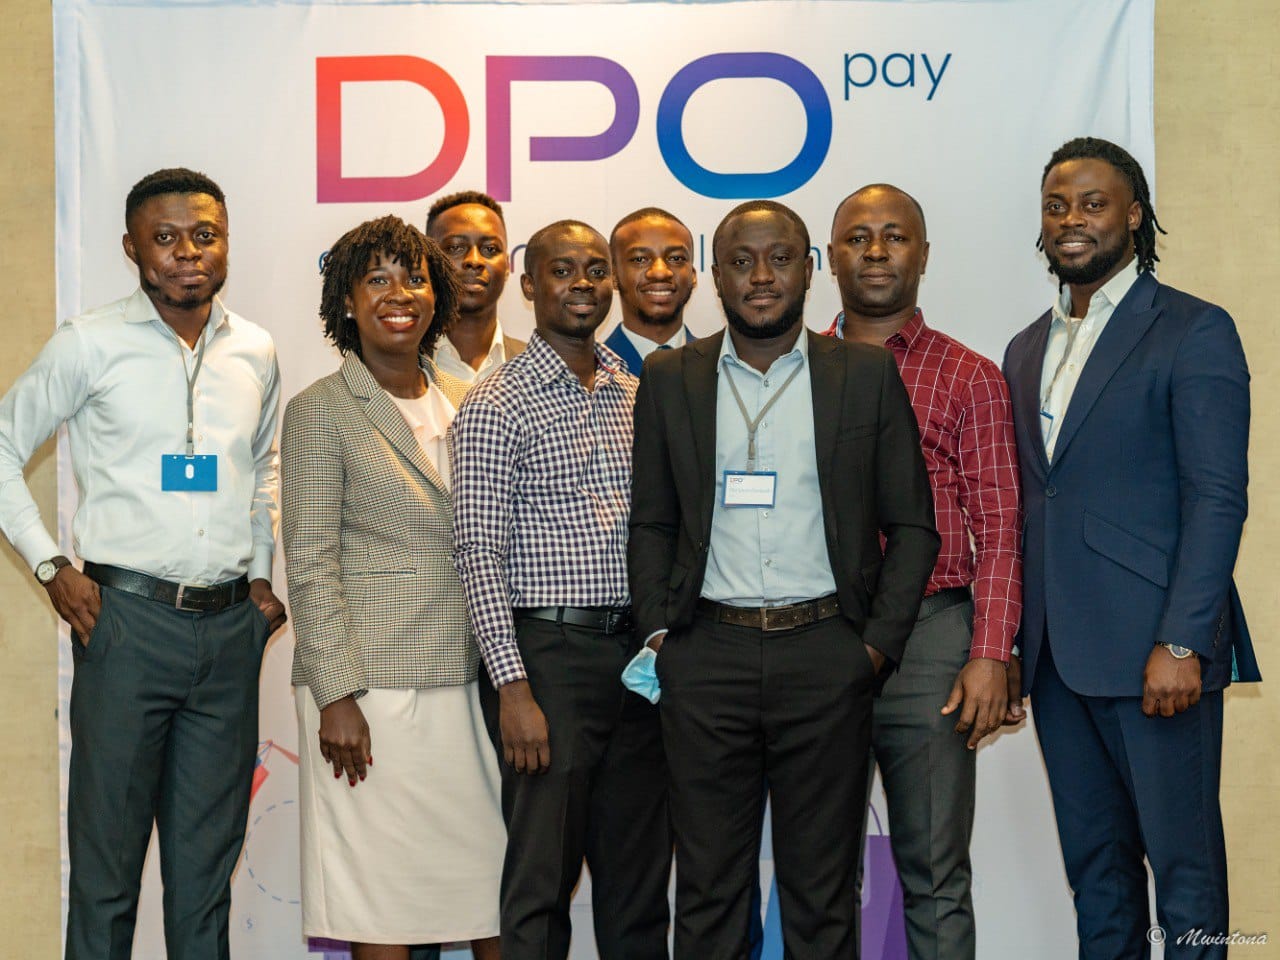 Founded in Kenya, DPO Group has been operating successfully throughout Africa since 2006